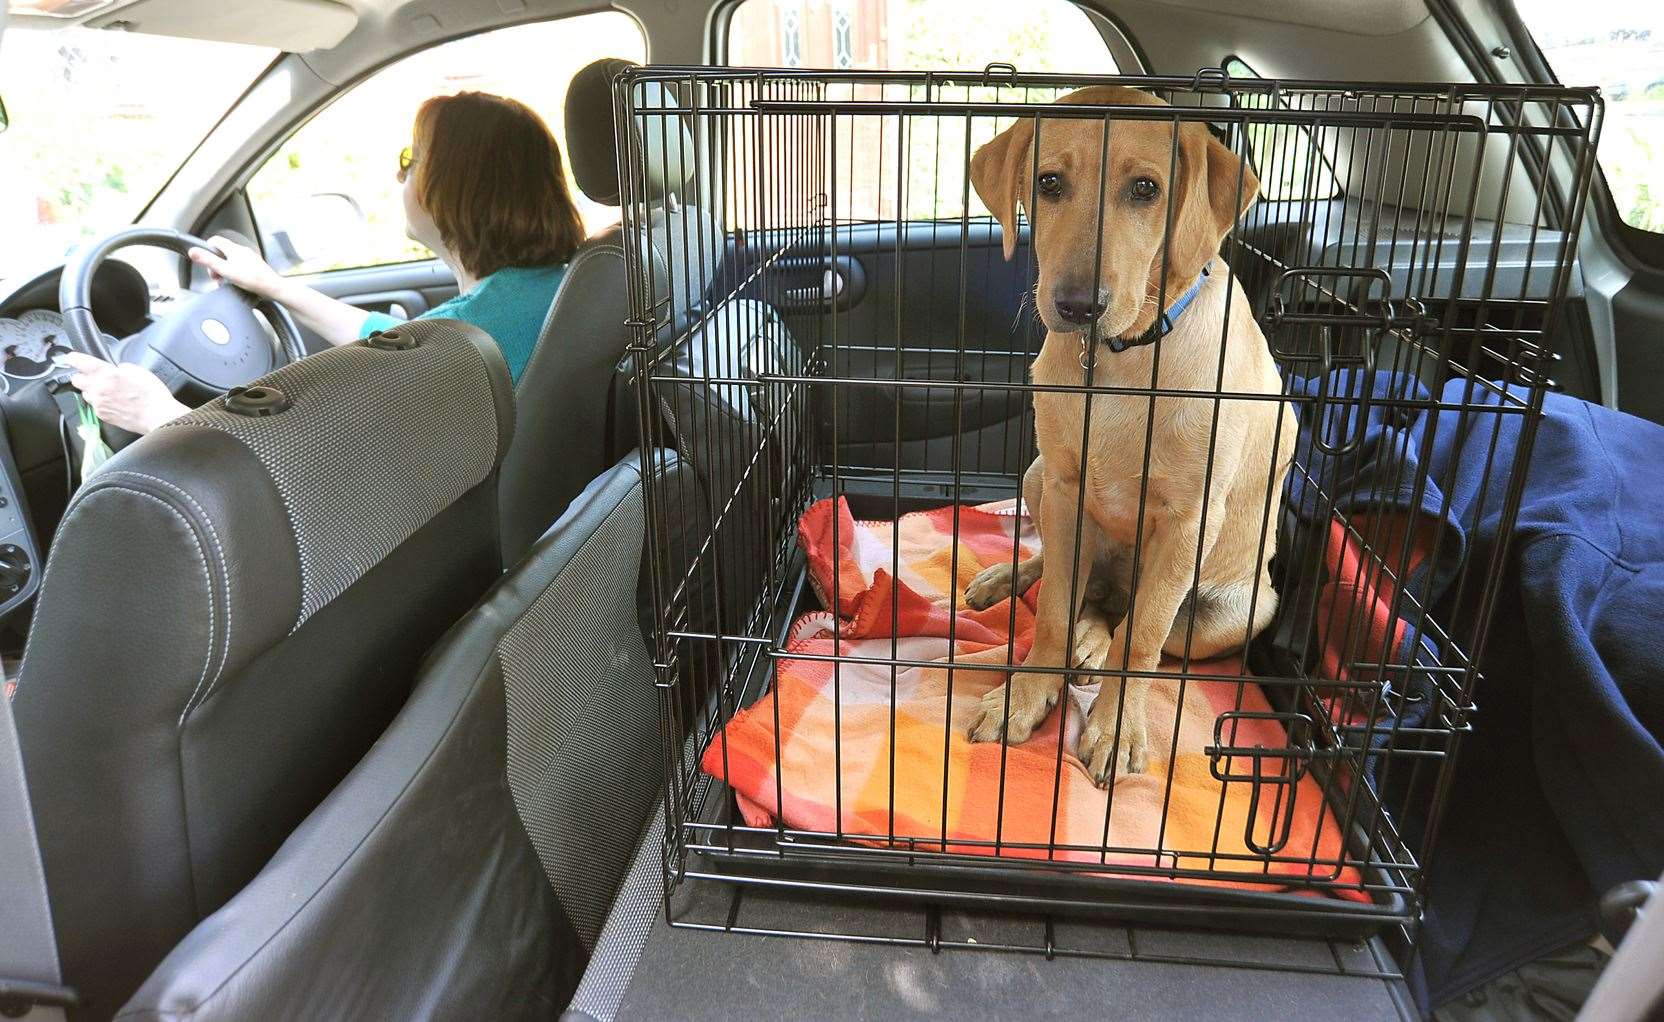 When putting your dog in the car make sure they are secured properly and safely